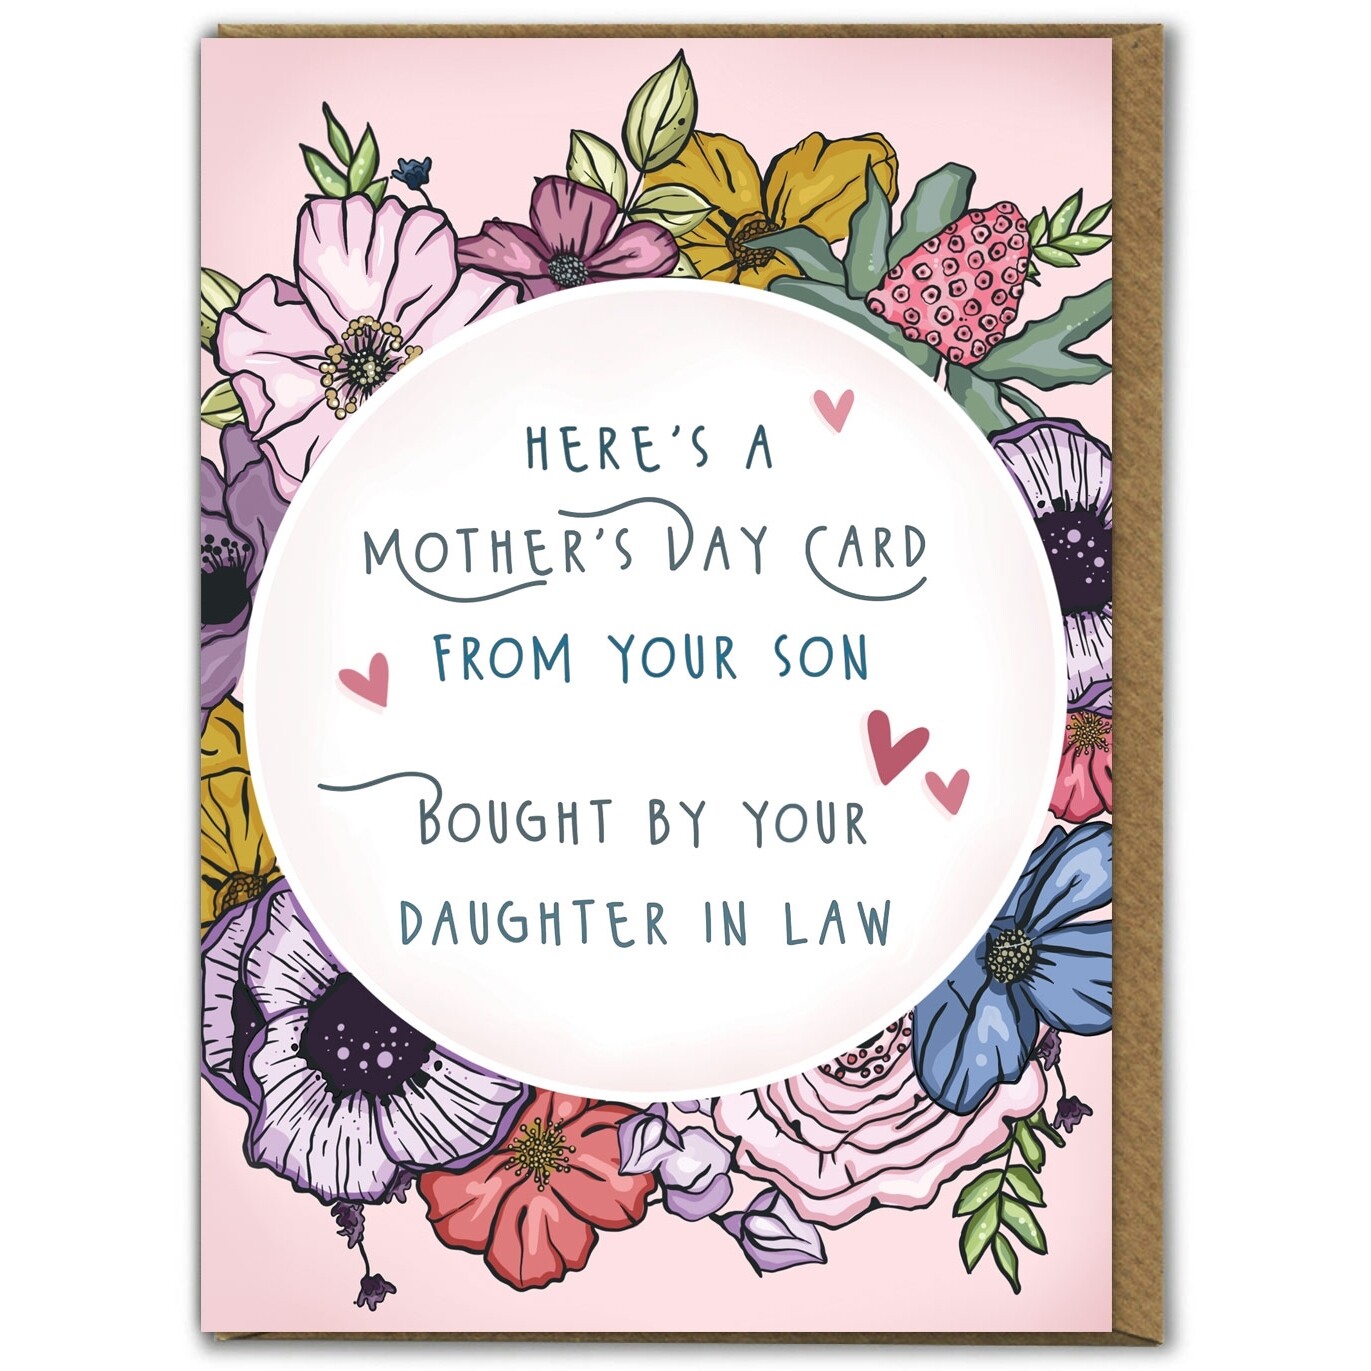 Bought by Daughter Card